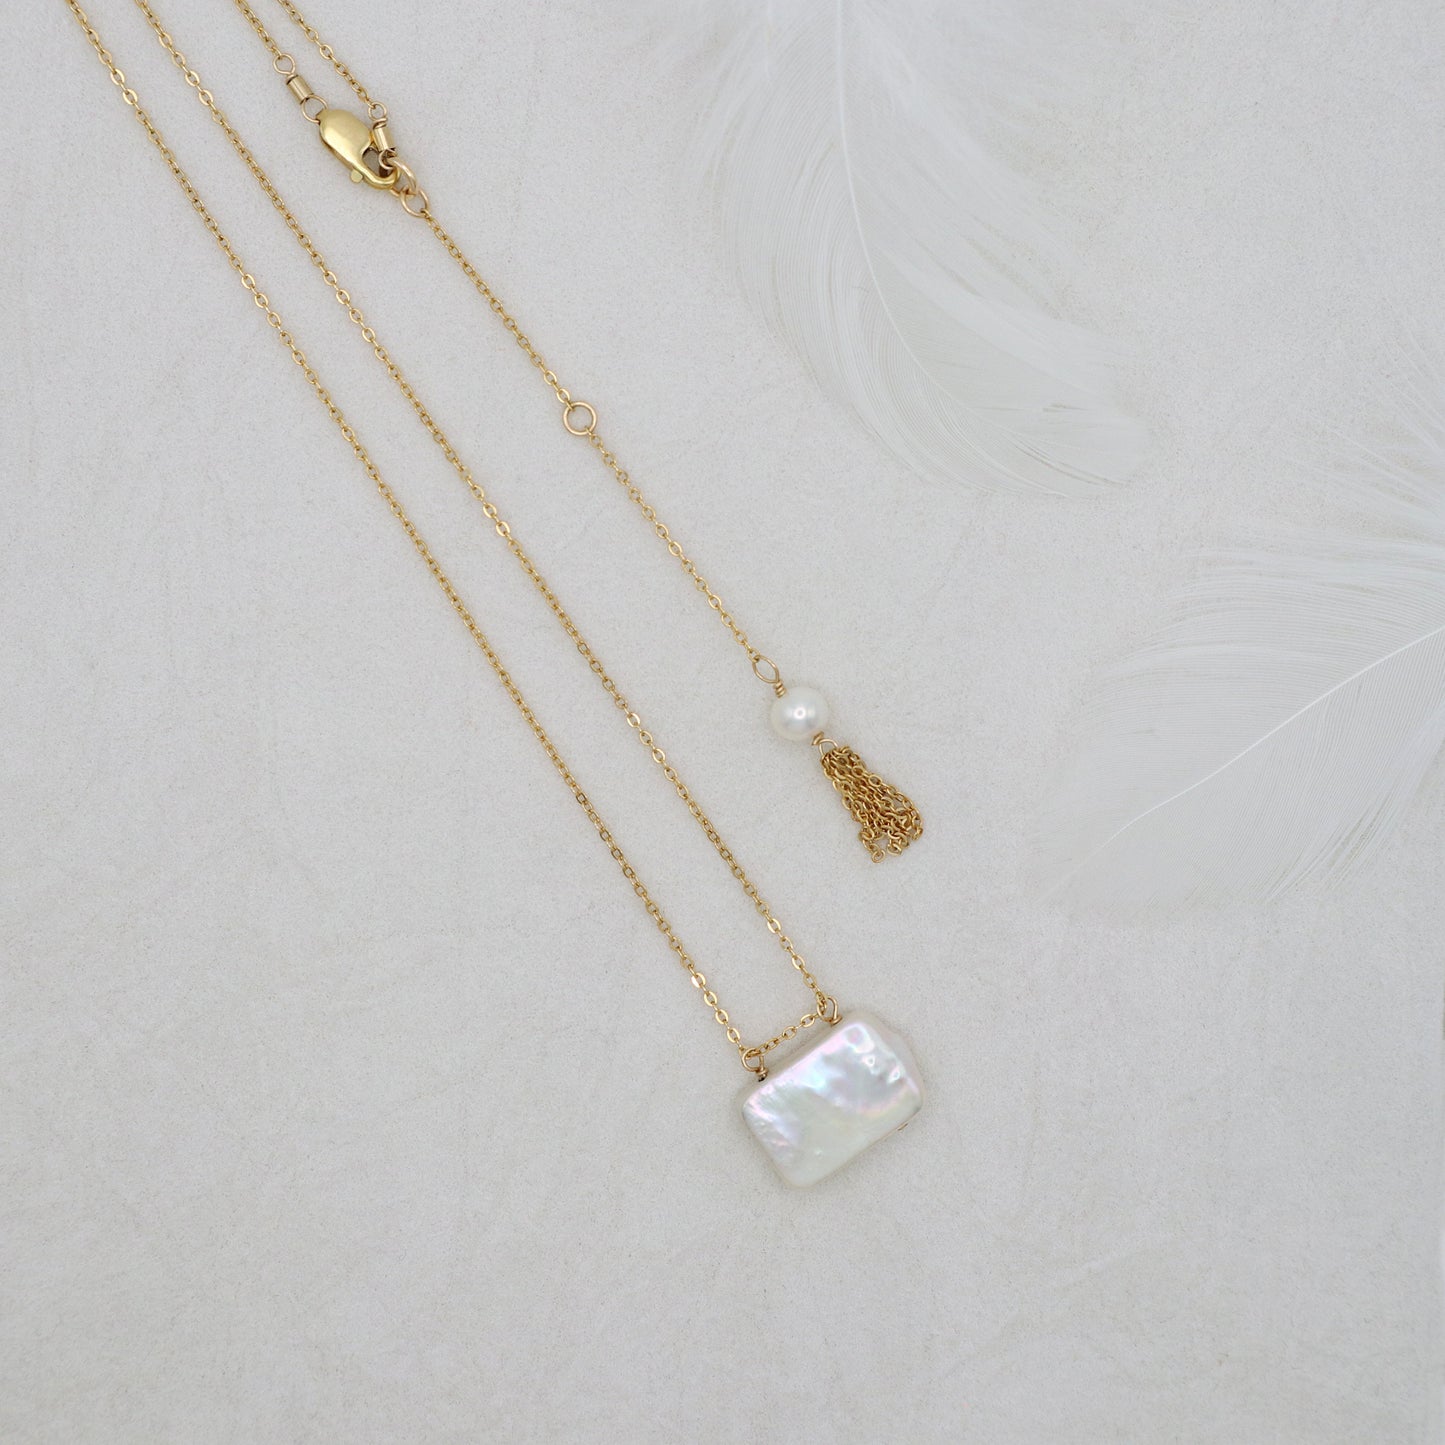 RECTANGULAR PEARL NECKLACE - GOLD